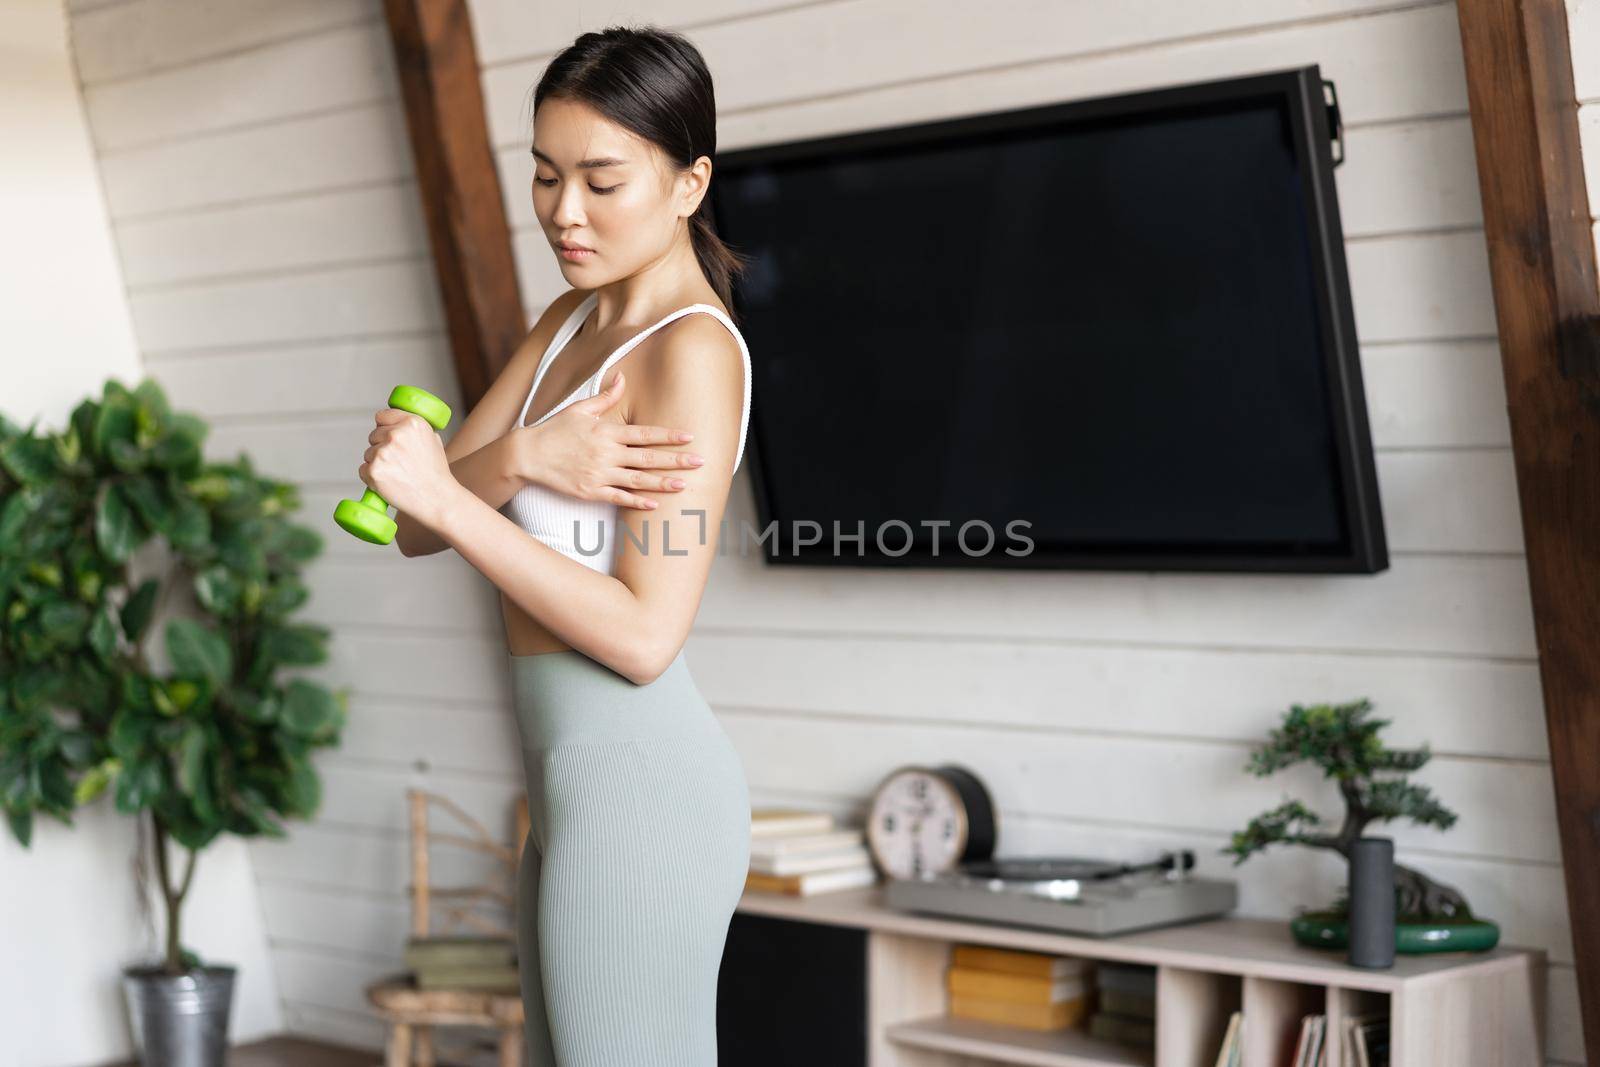 Active and healthy asian girl with fit body doing fitness exercises at home, lifting dumbbells and touching her biceps, workout in living room.